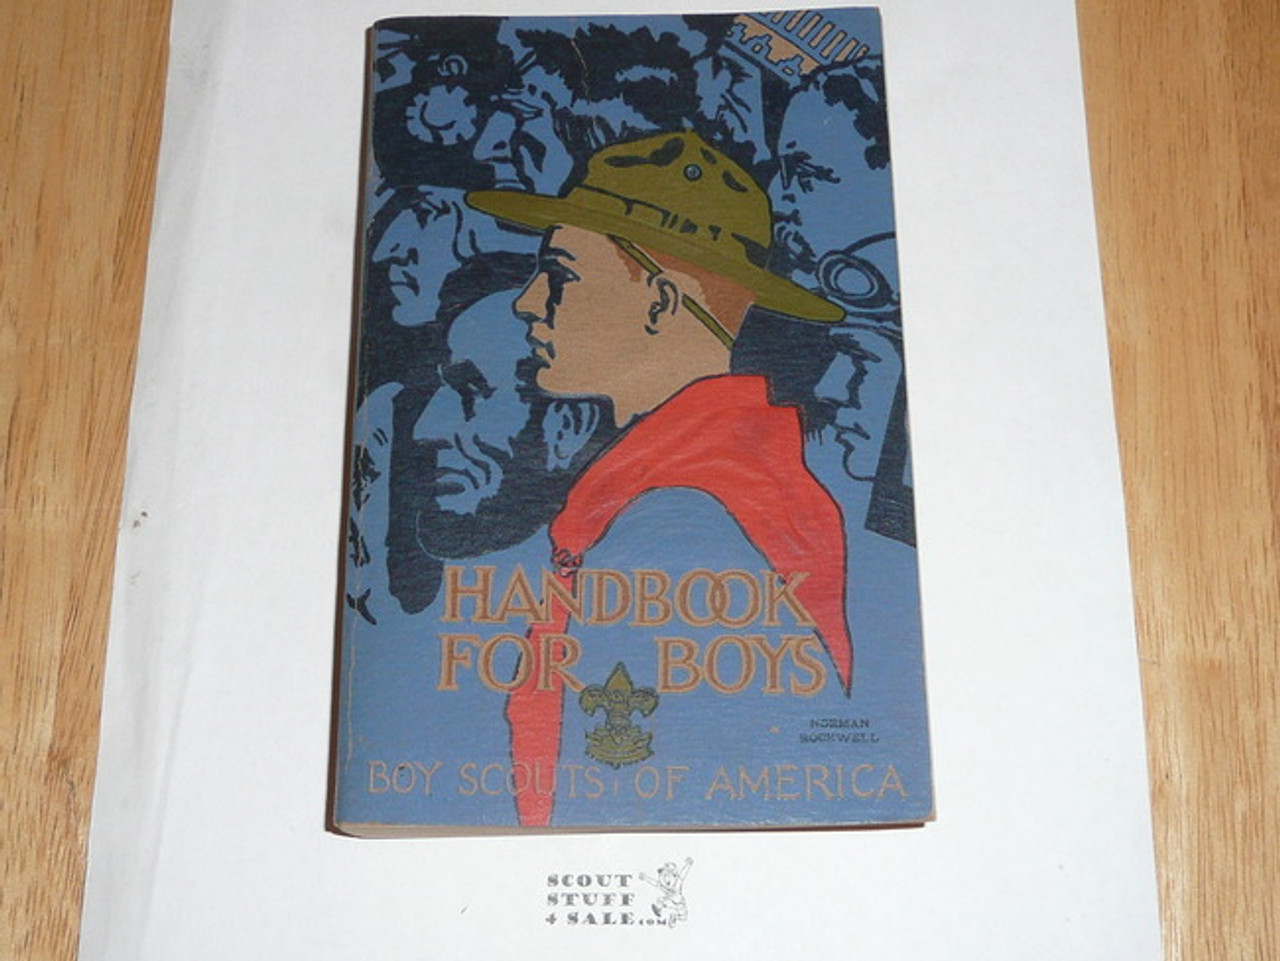 1930 Boy Scout Handbook, Third Edition, Thirteenth Printing, Norman Rockwell Cover, MINT Condition